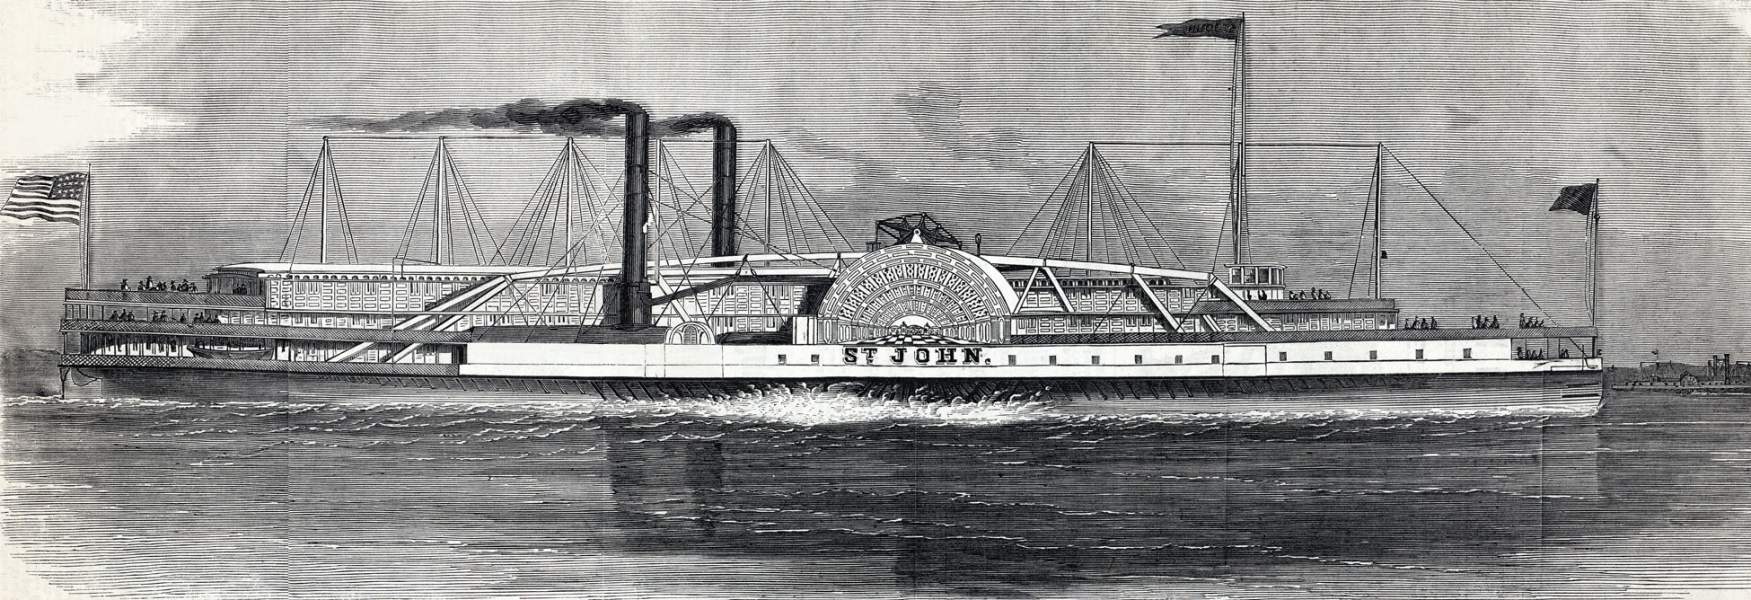 Hudson River People's Line steamer S.S. St. John, New York, artist's impression, zoomable image